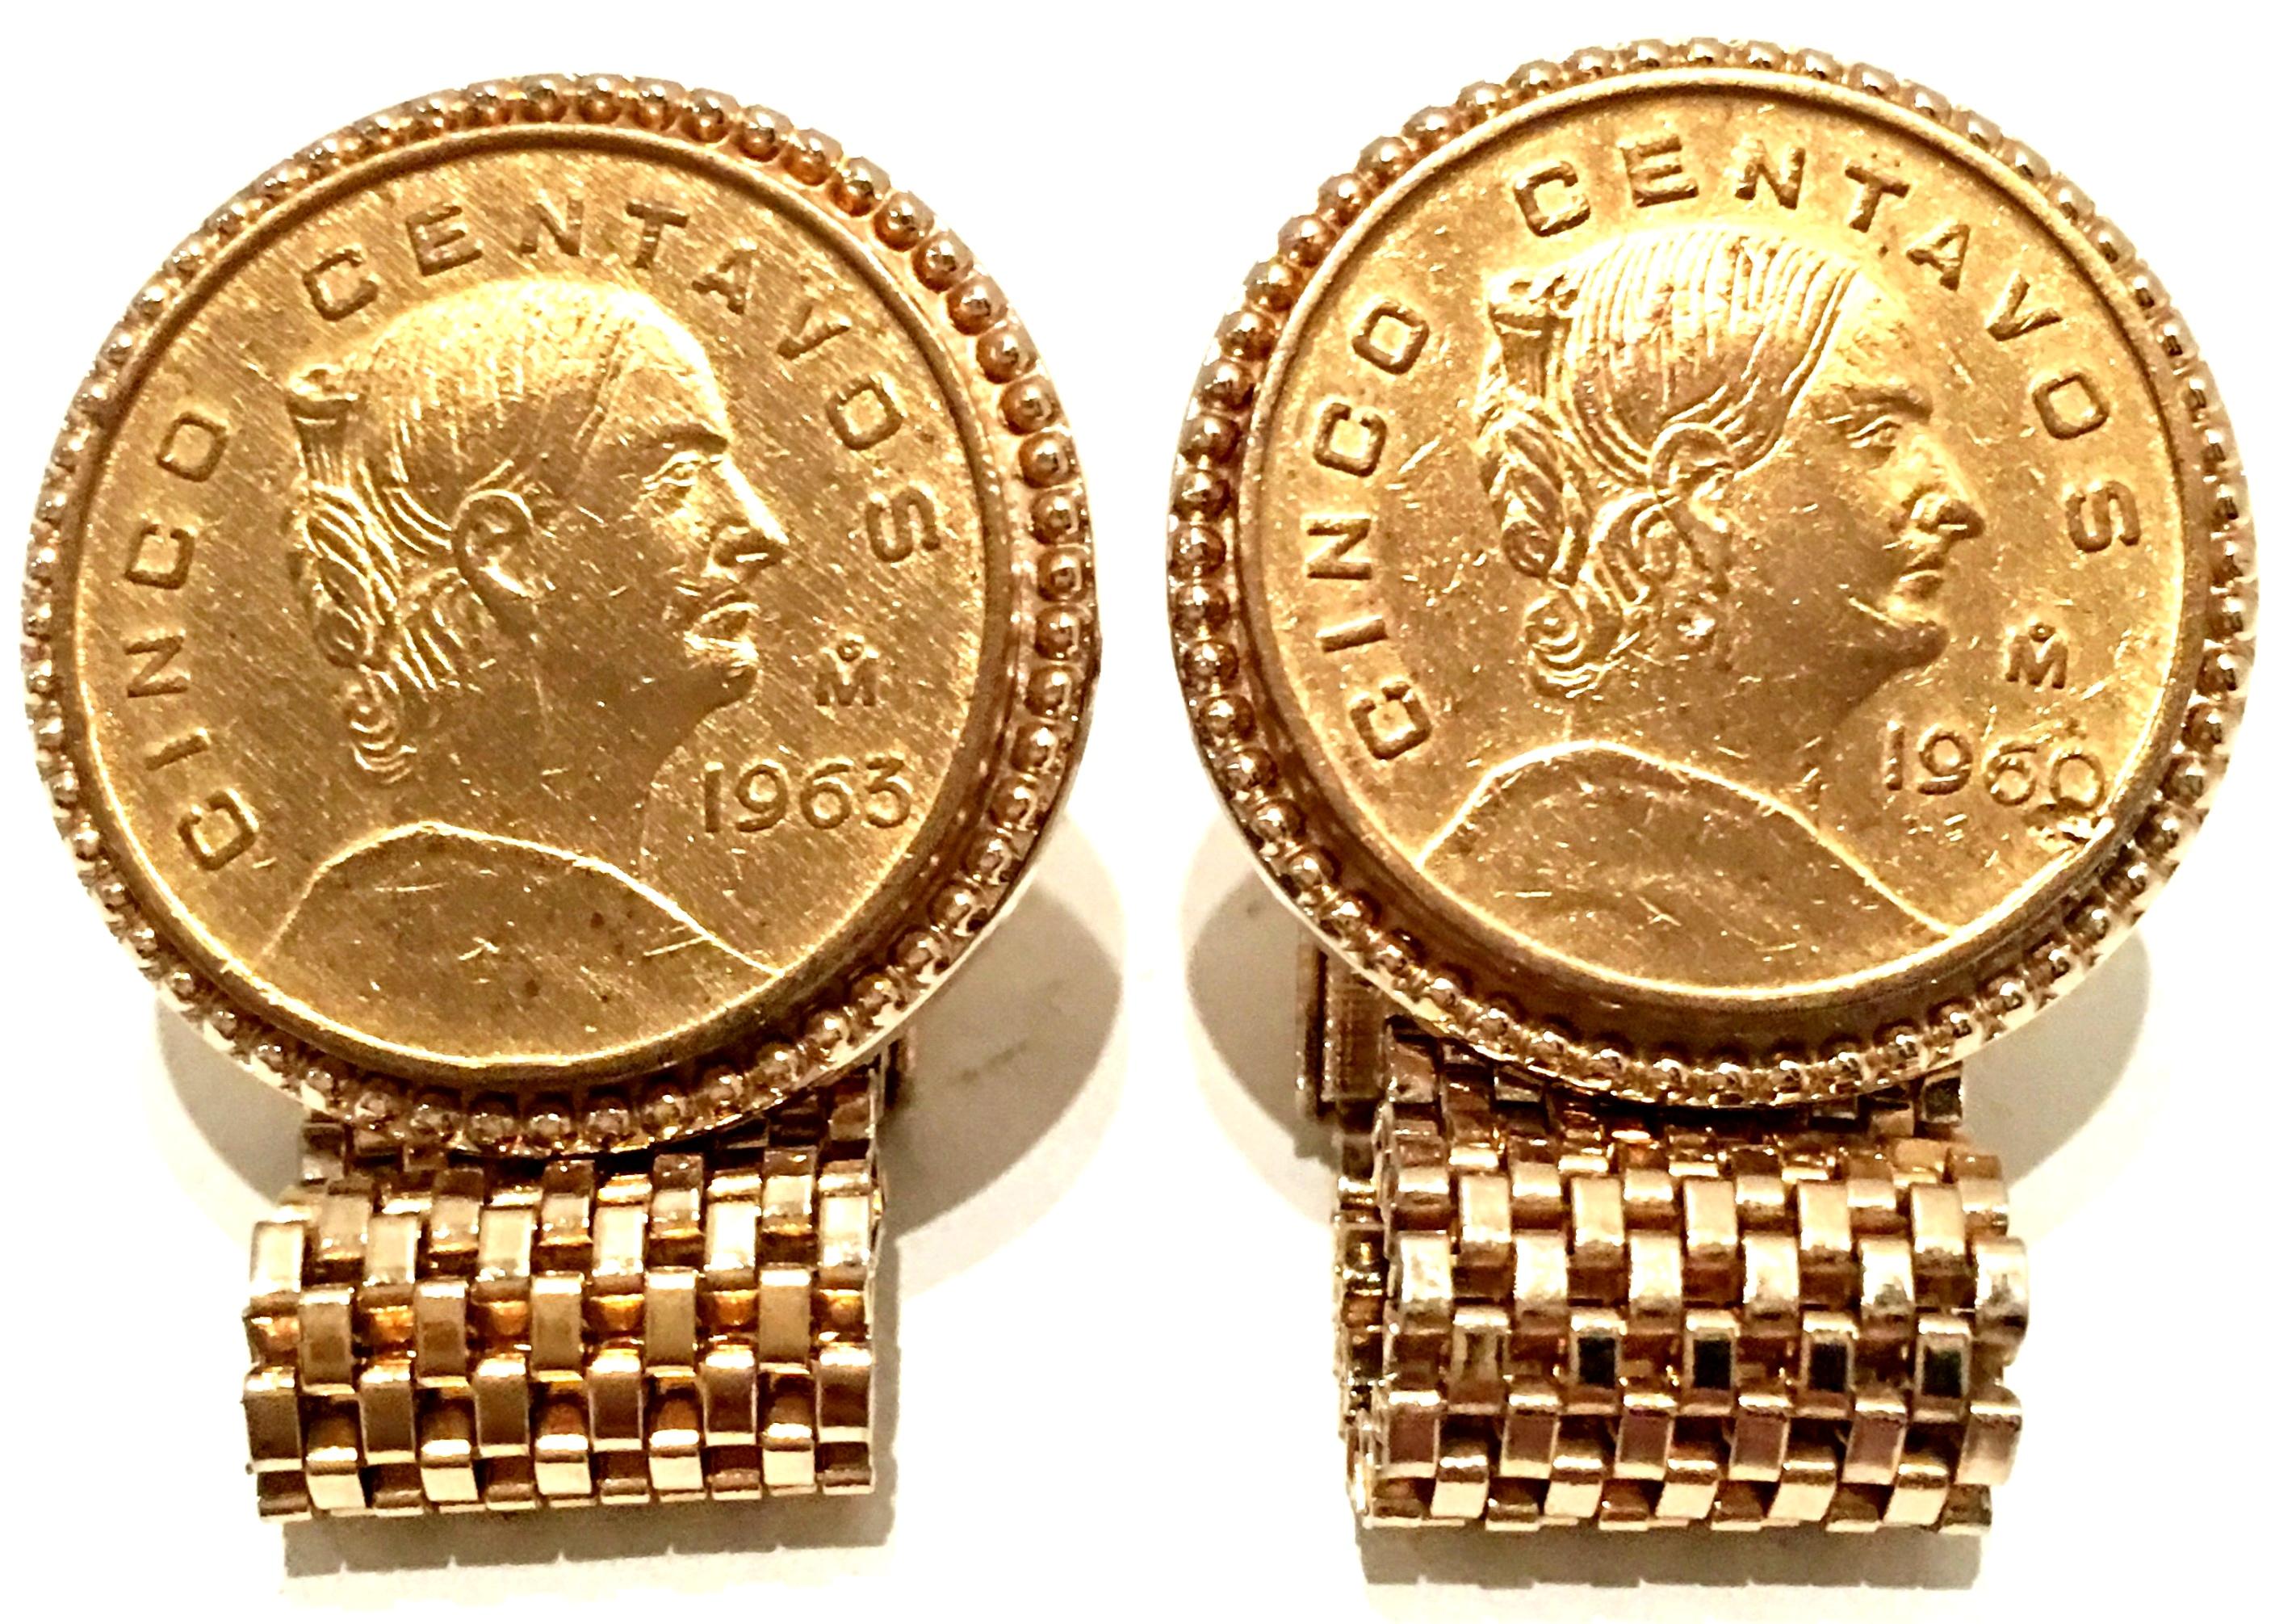 Mid-20th Century pair Of Gold Plate Cinco Centavos Mexican Coin Cufflinks. Each coin is uncirculated and a 